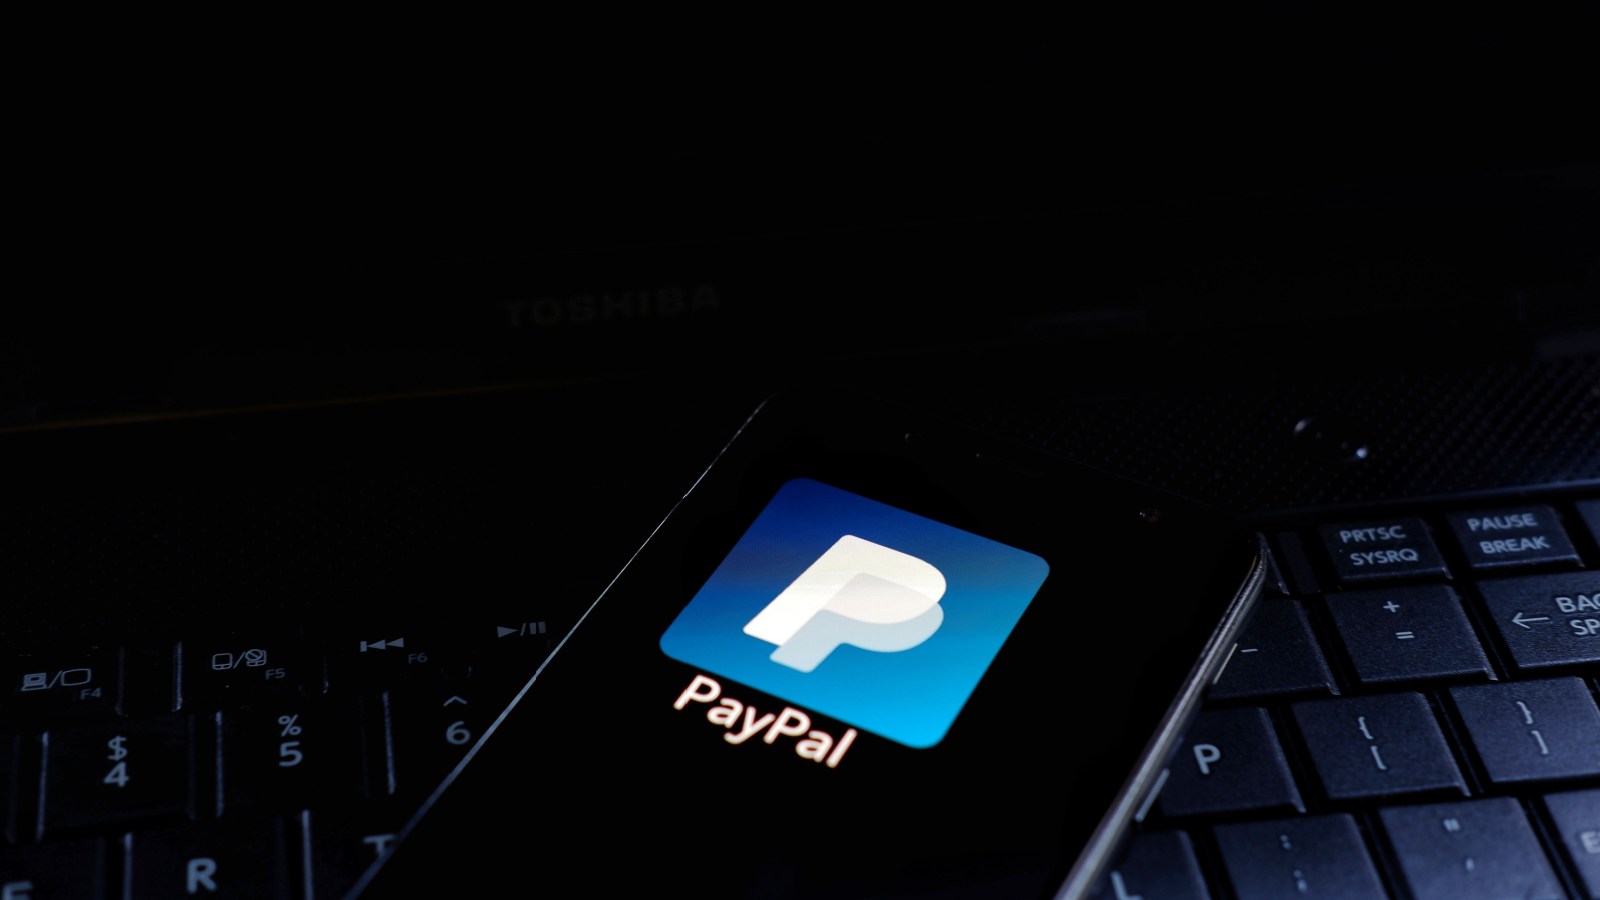 PYPL Under Pressure: Is Now the Time to Bet on PayPal’s Comeback?